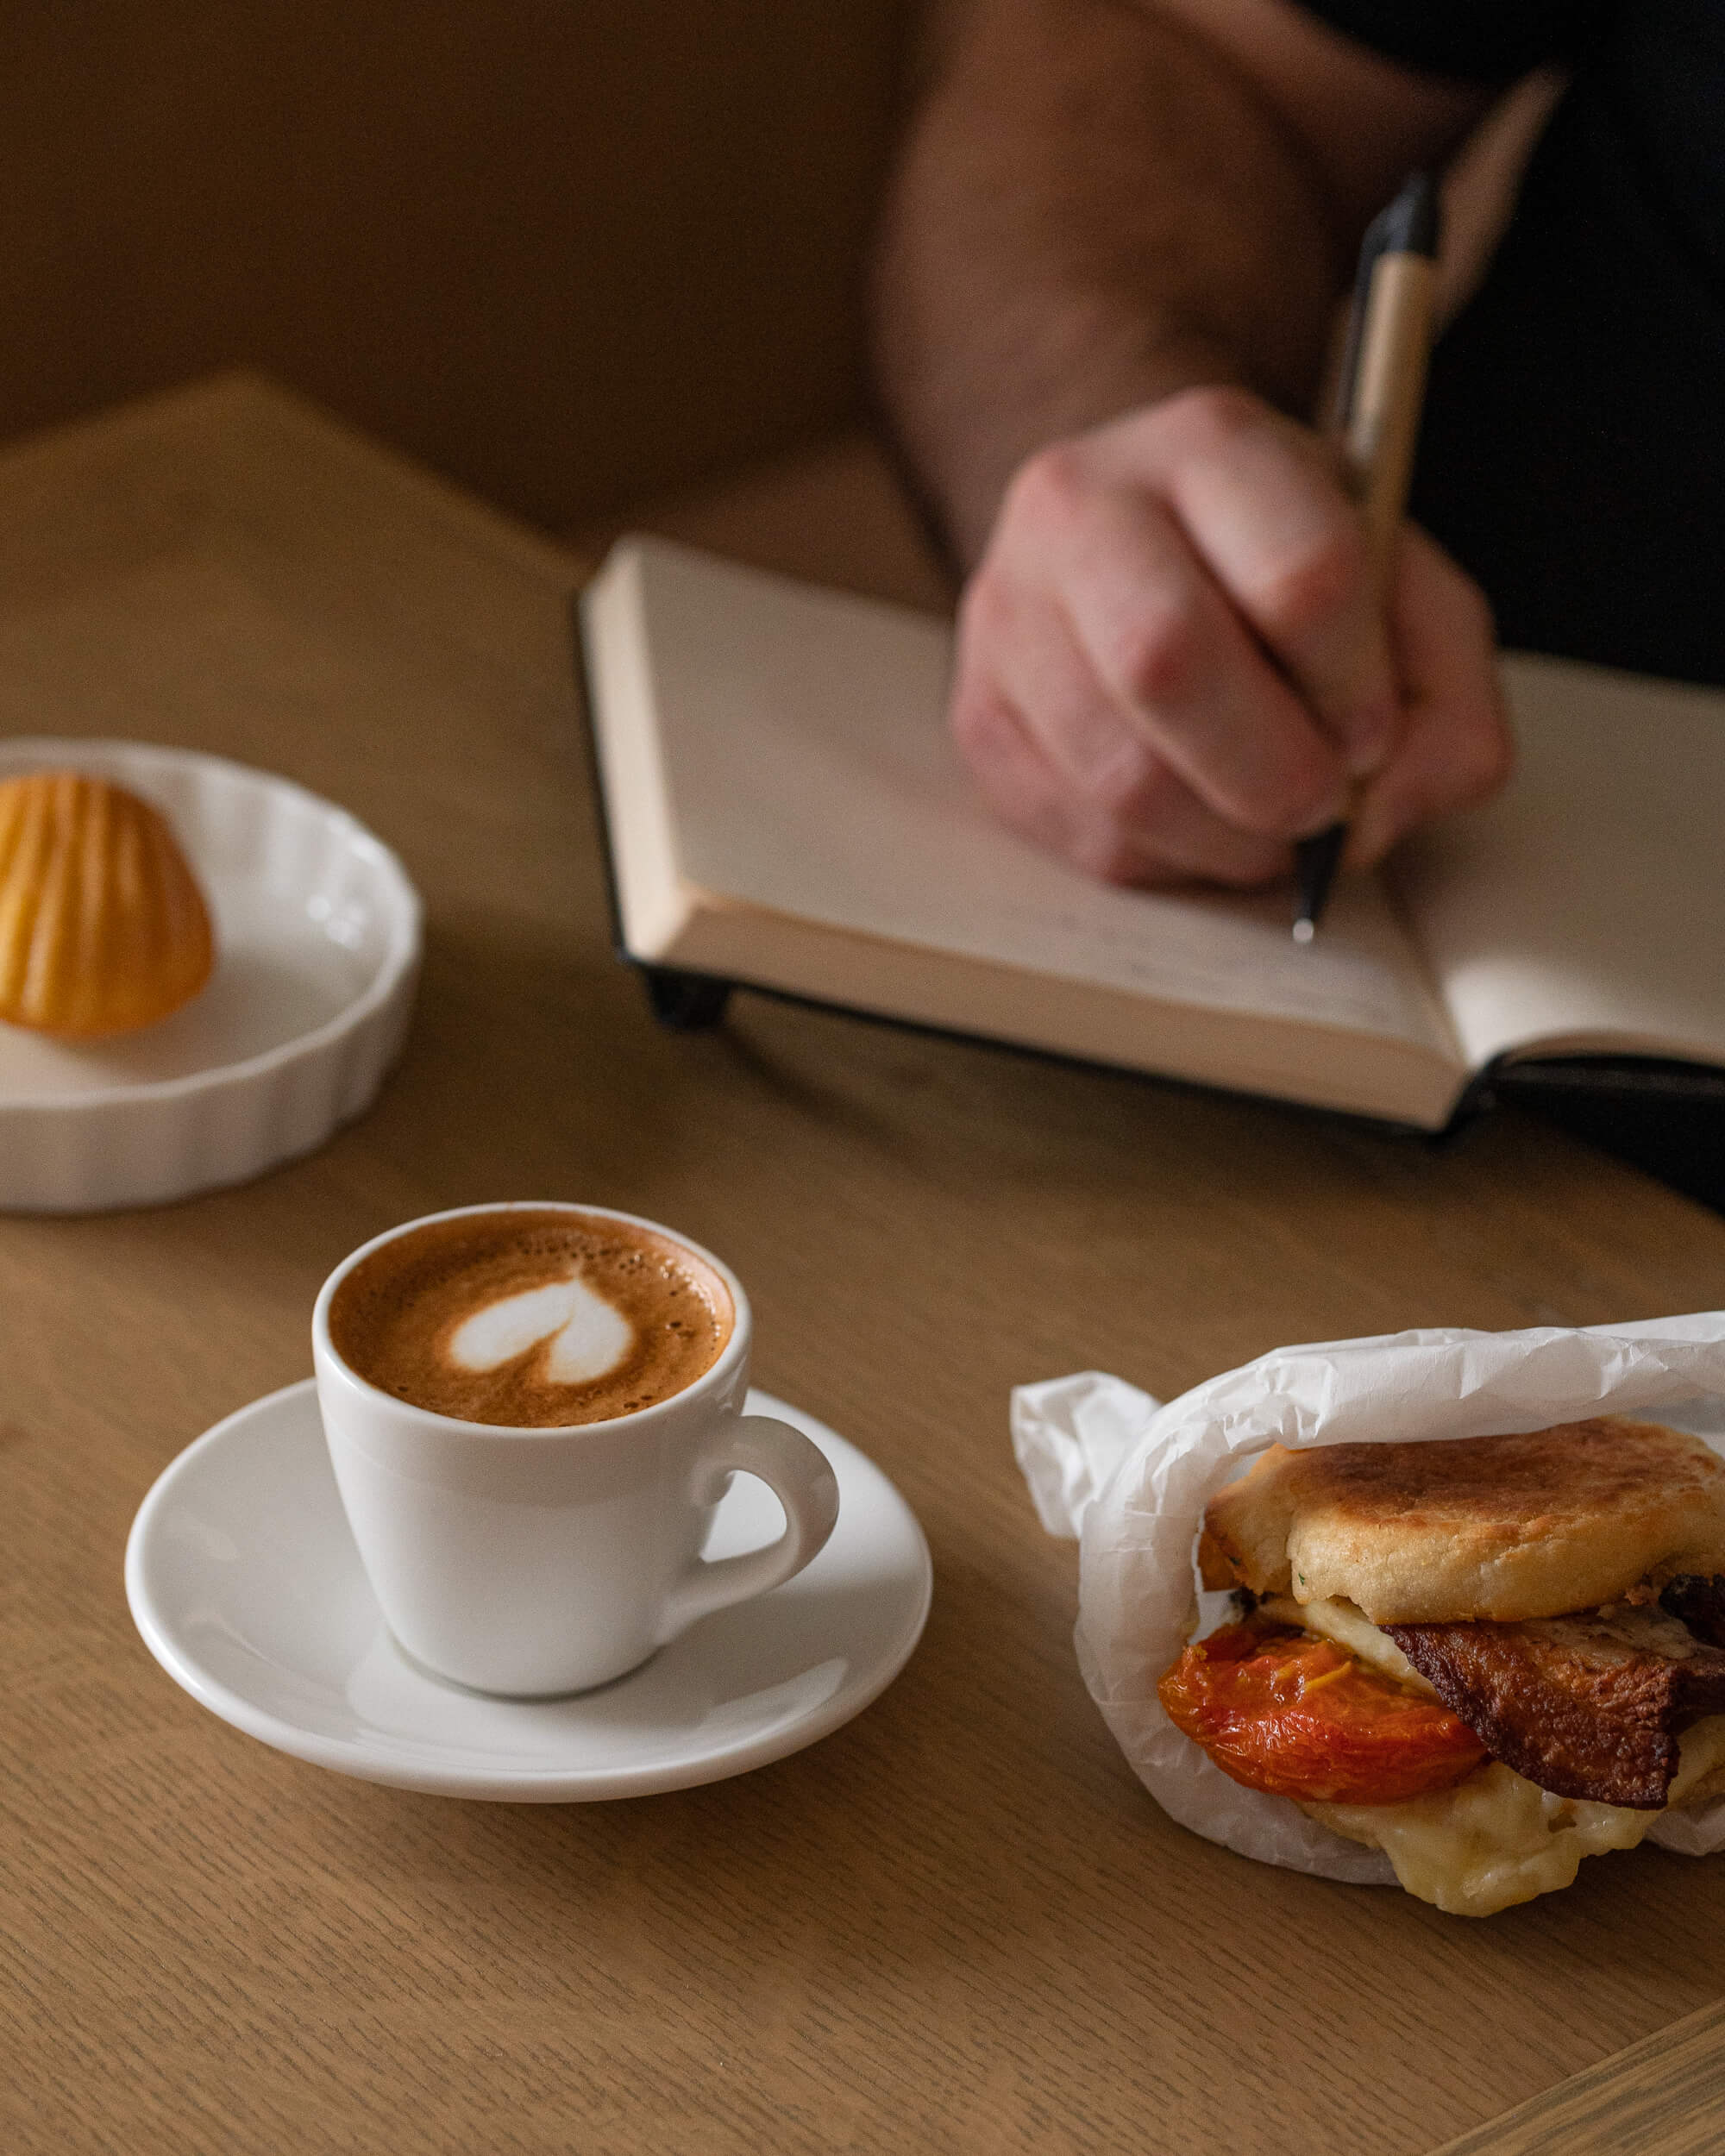 Person writing in a notebook while enjoying breakfast items